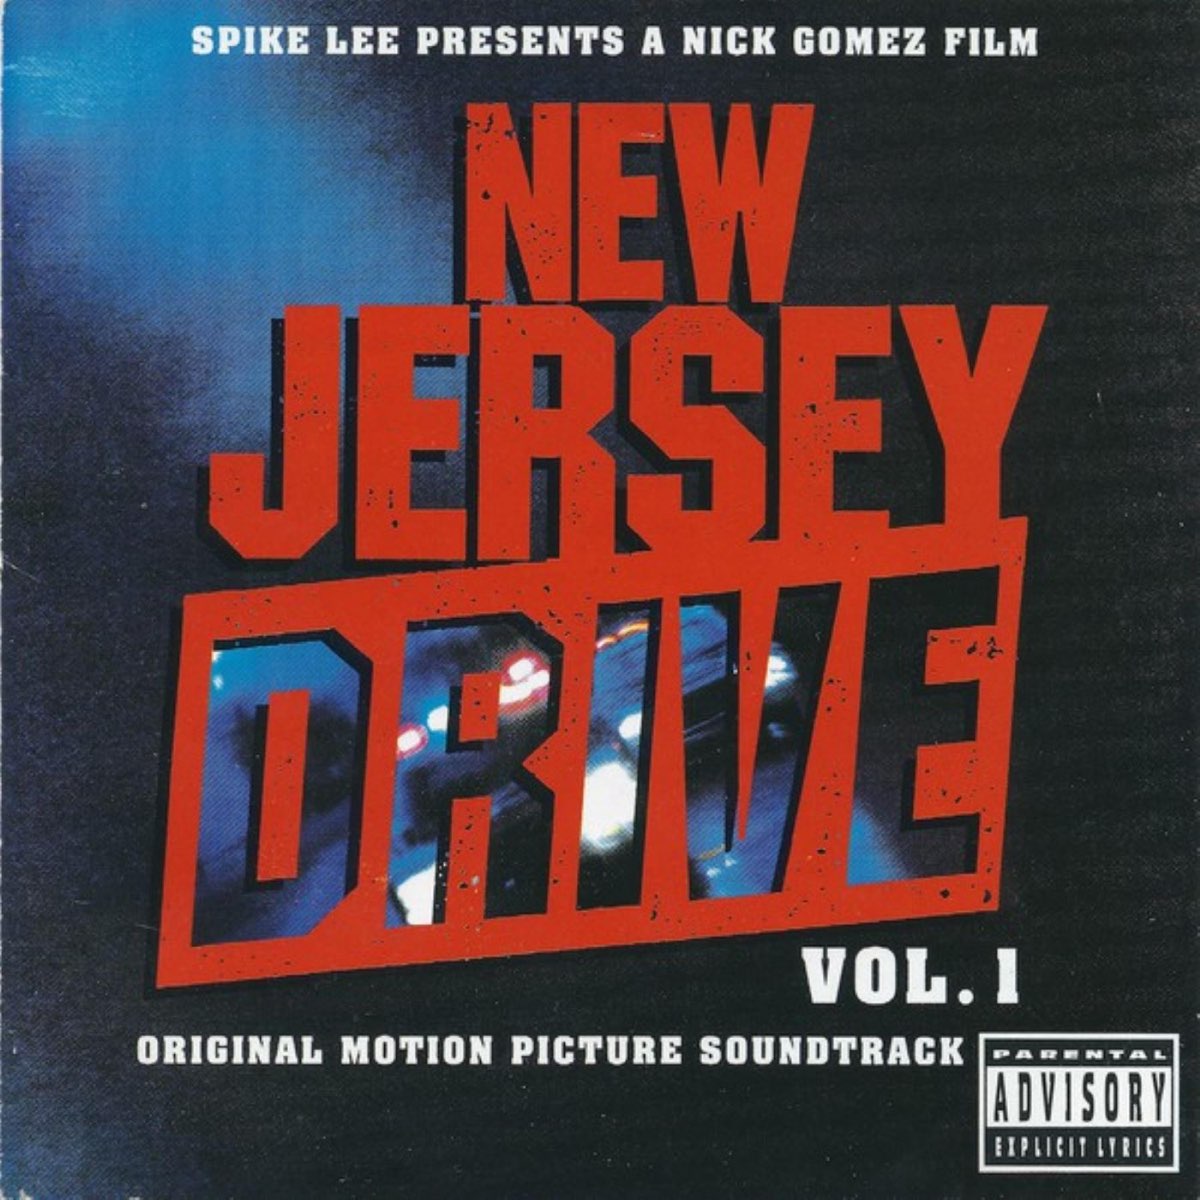 New Jersey Drive Vol. 1 by Various Artists on Apple Music